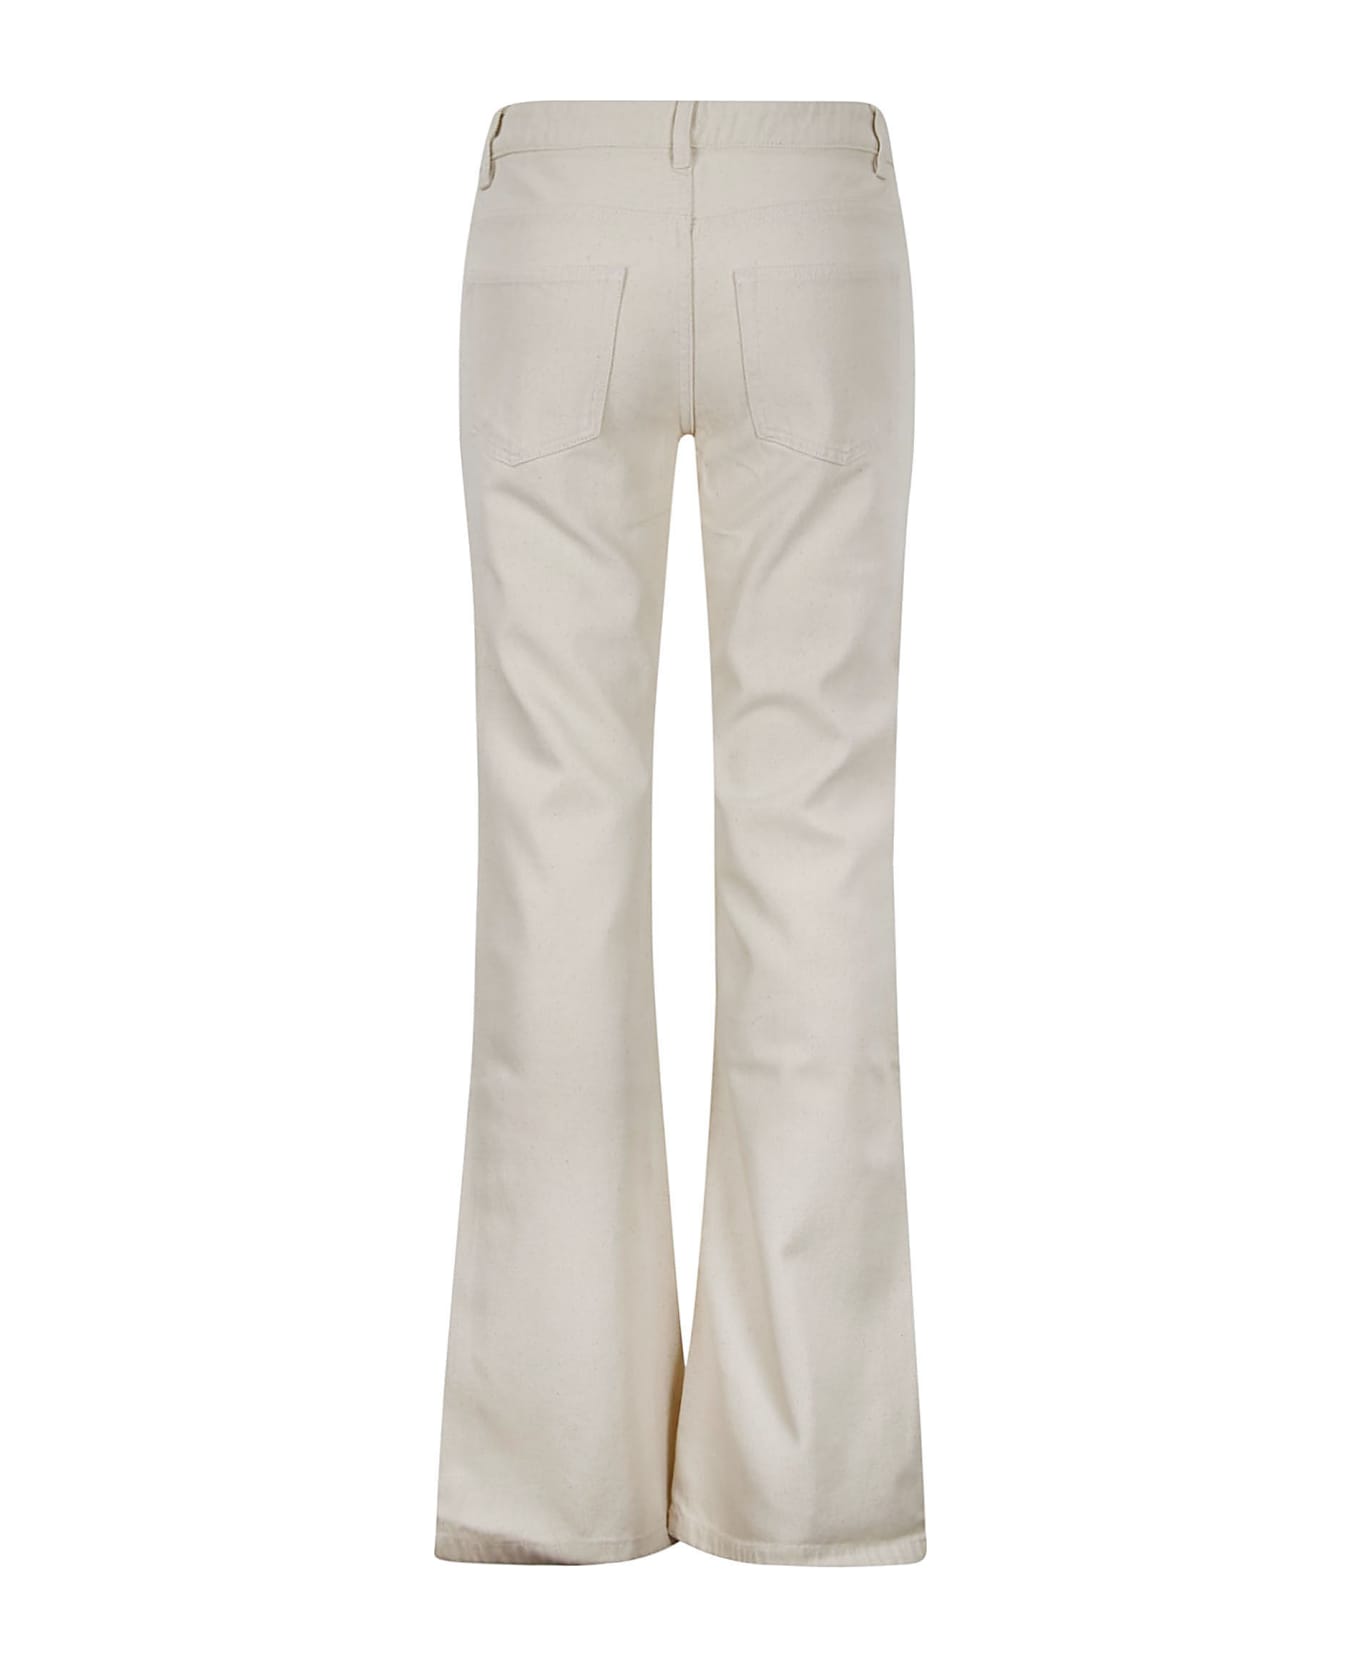 A.P.C. 'is'' Jeans - BEIGE